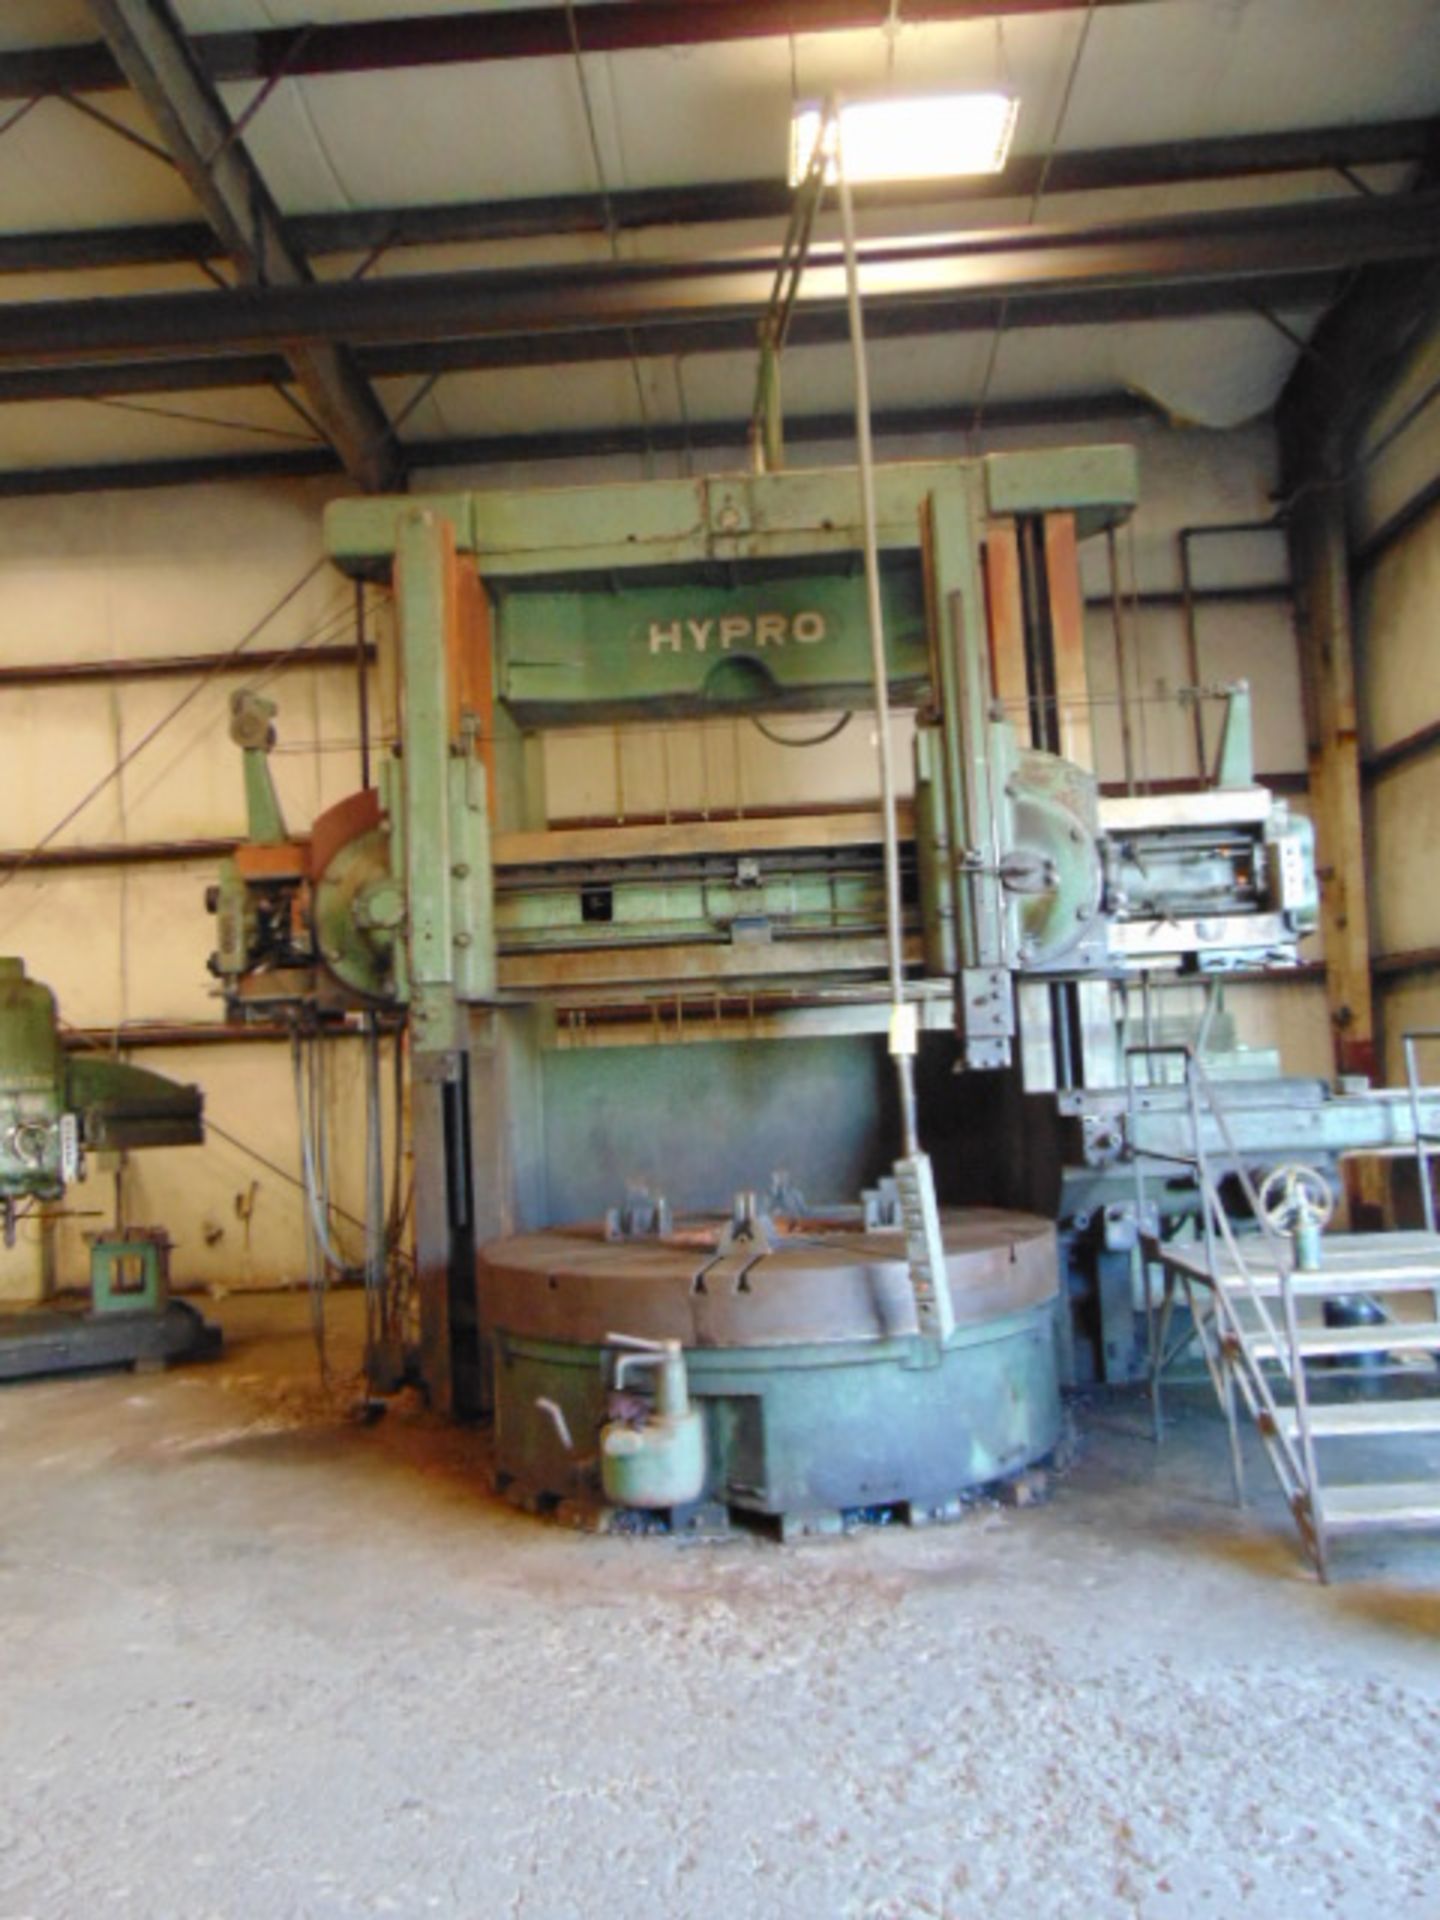 VERTICAL BORING MILL, GIDDINGS & LEWIS HYPRO 96”, approx. 104” sw. to column, approx. 96” under - Image 2 of 13